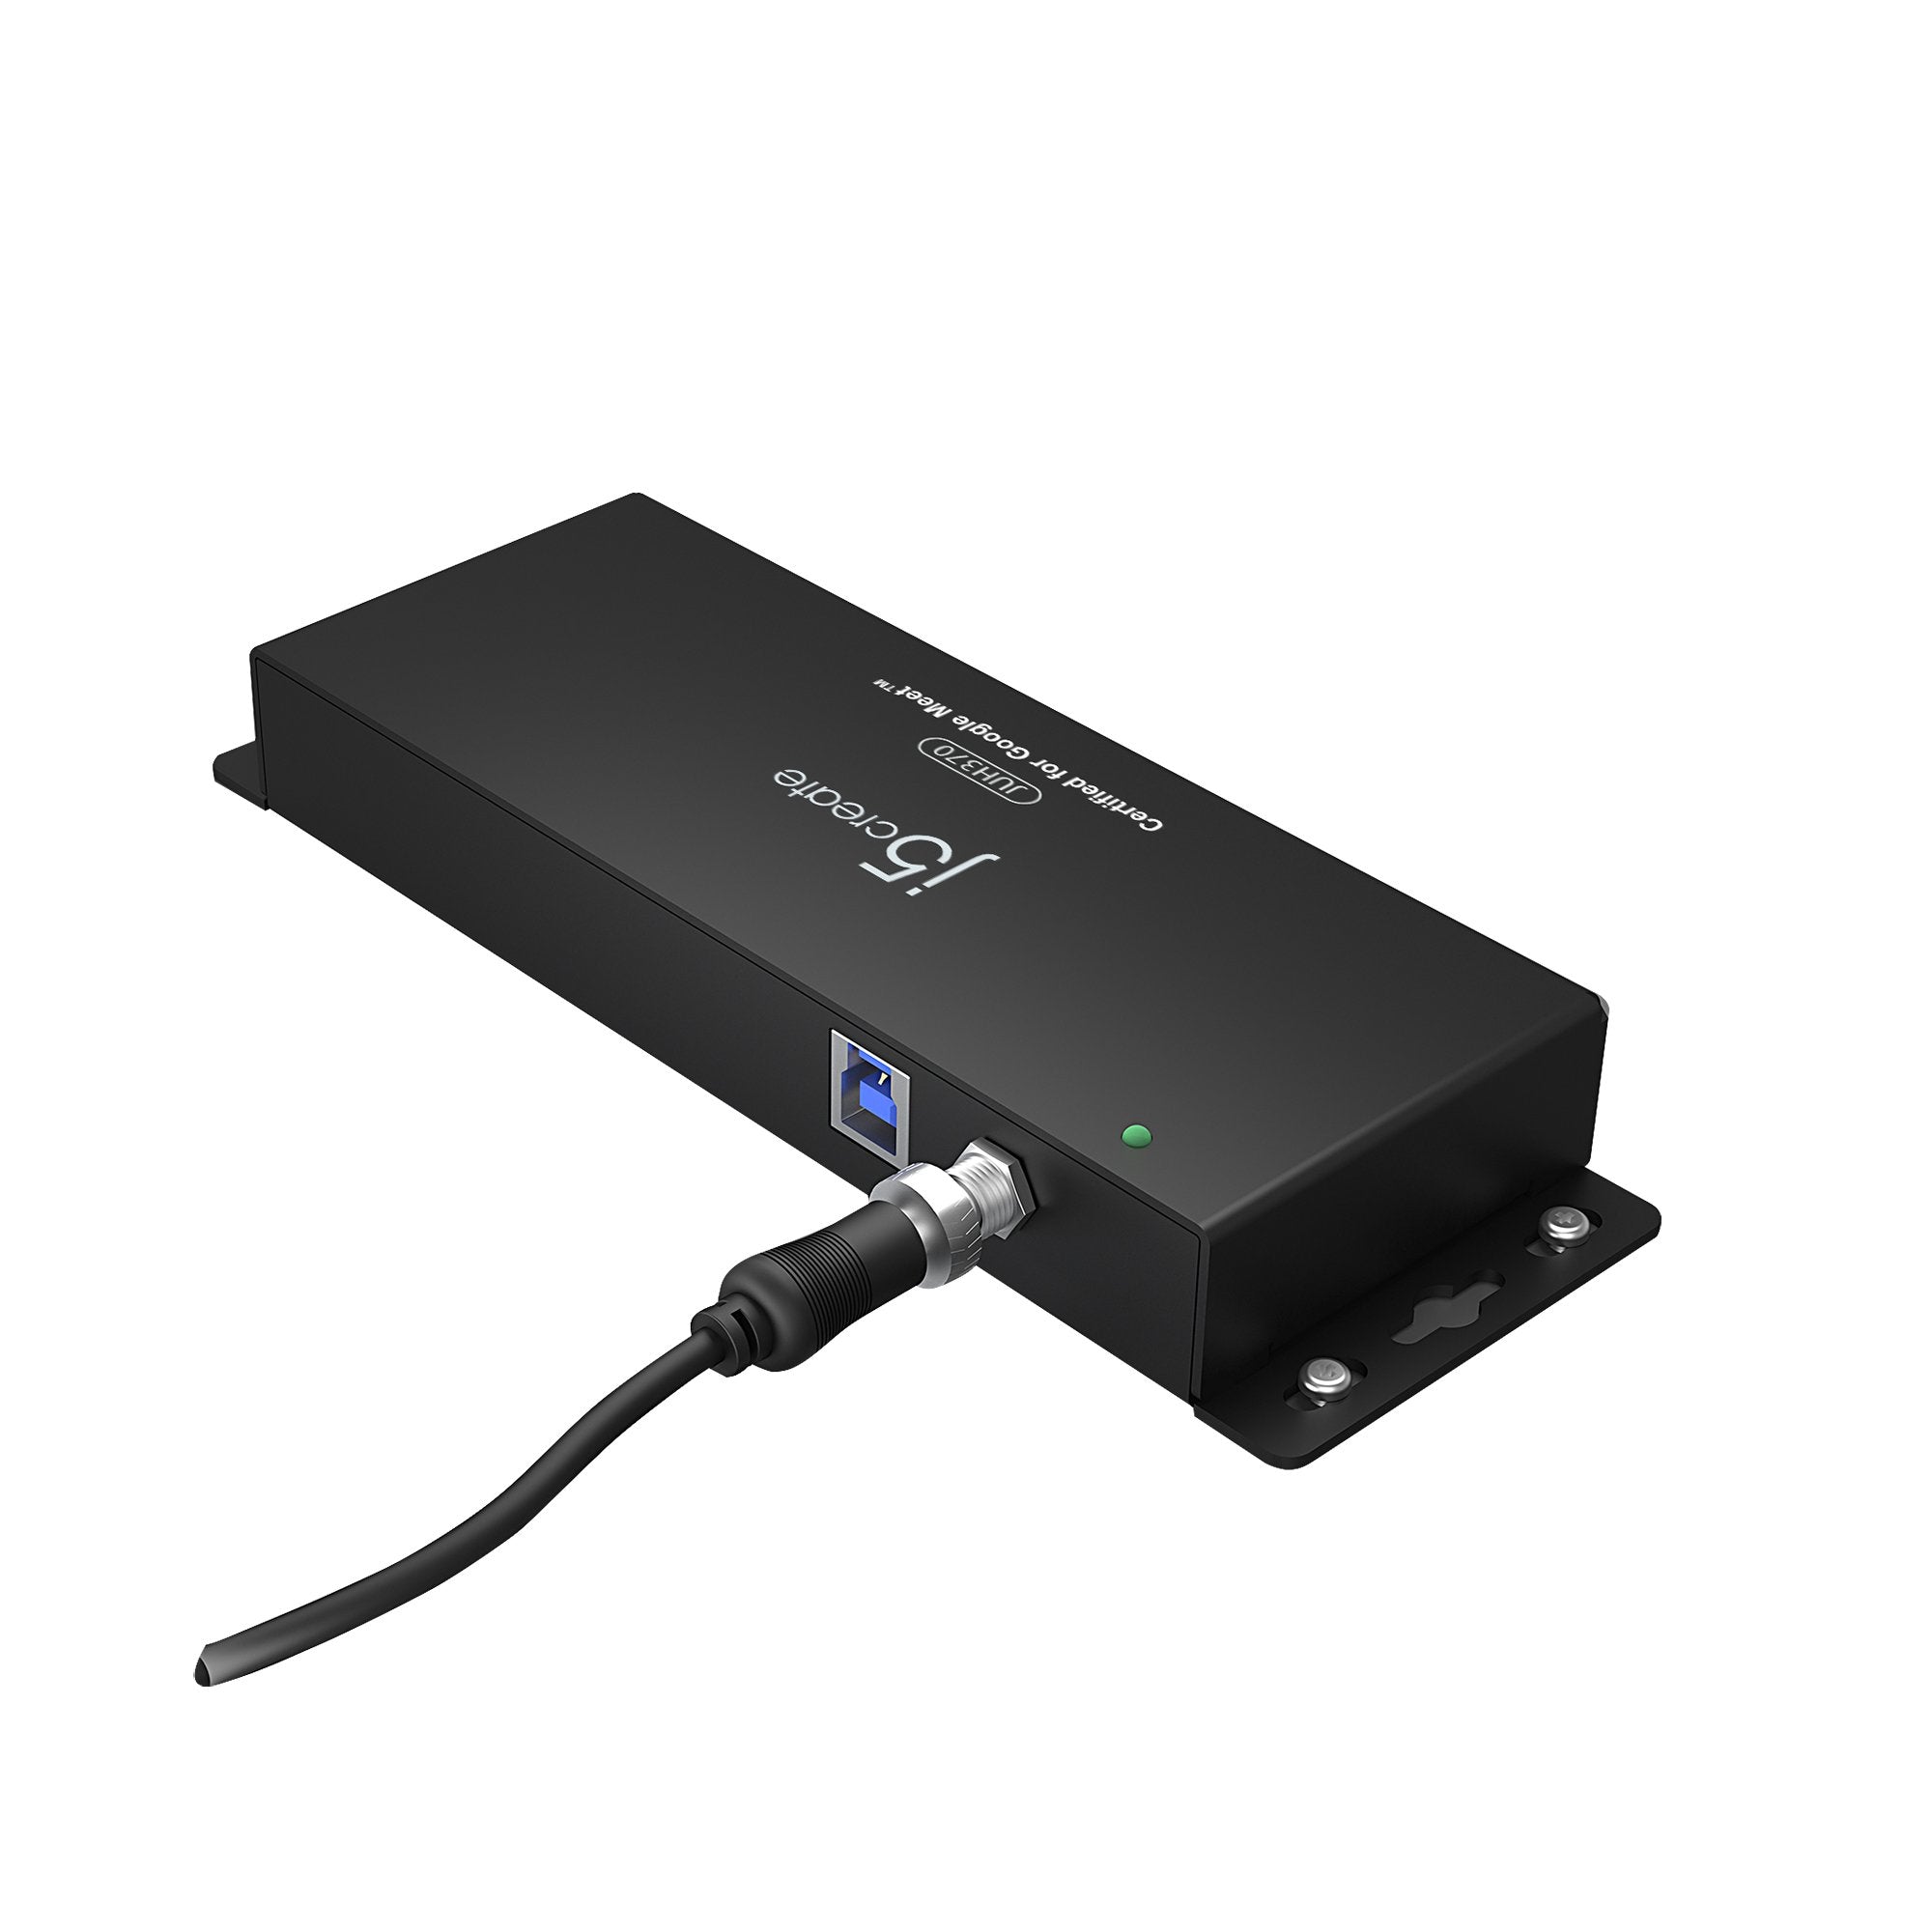 7-Port USB™ 3.0 Industrial Hub with ESD and Surge Protection